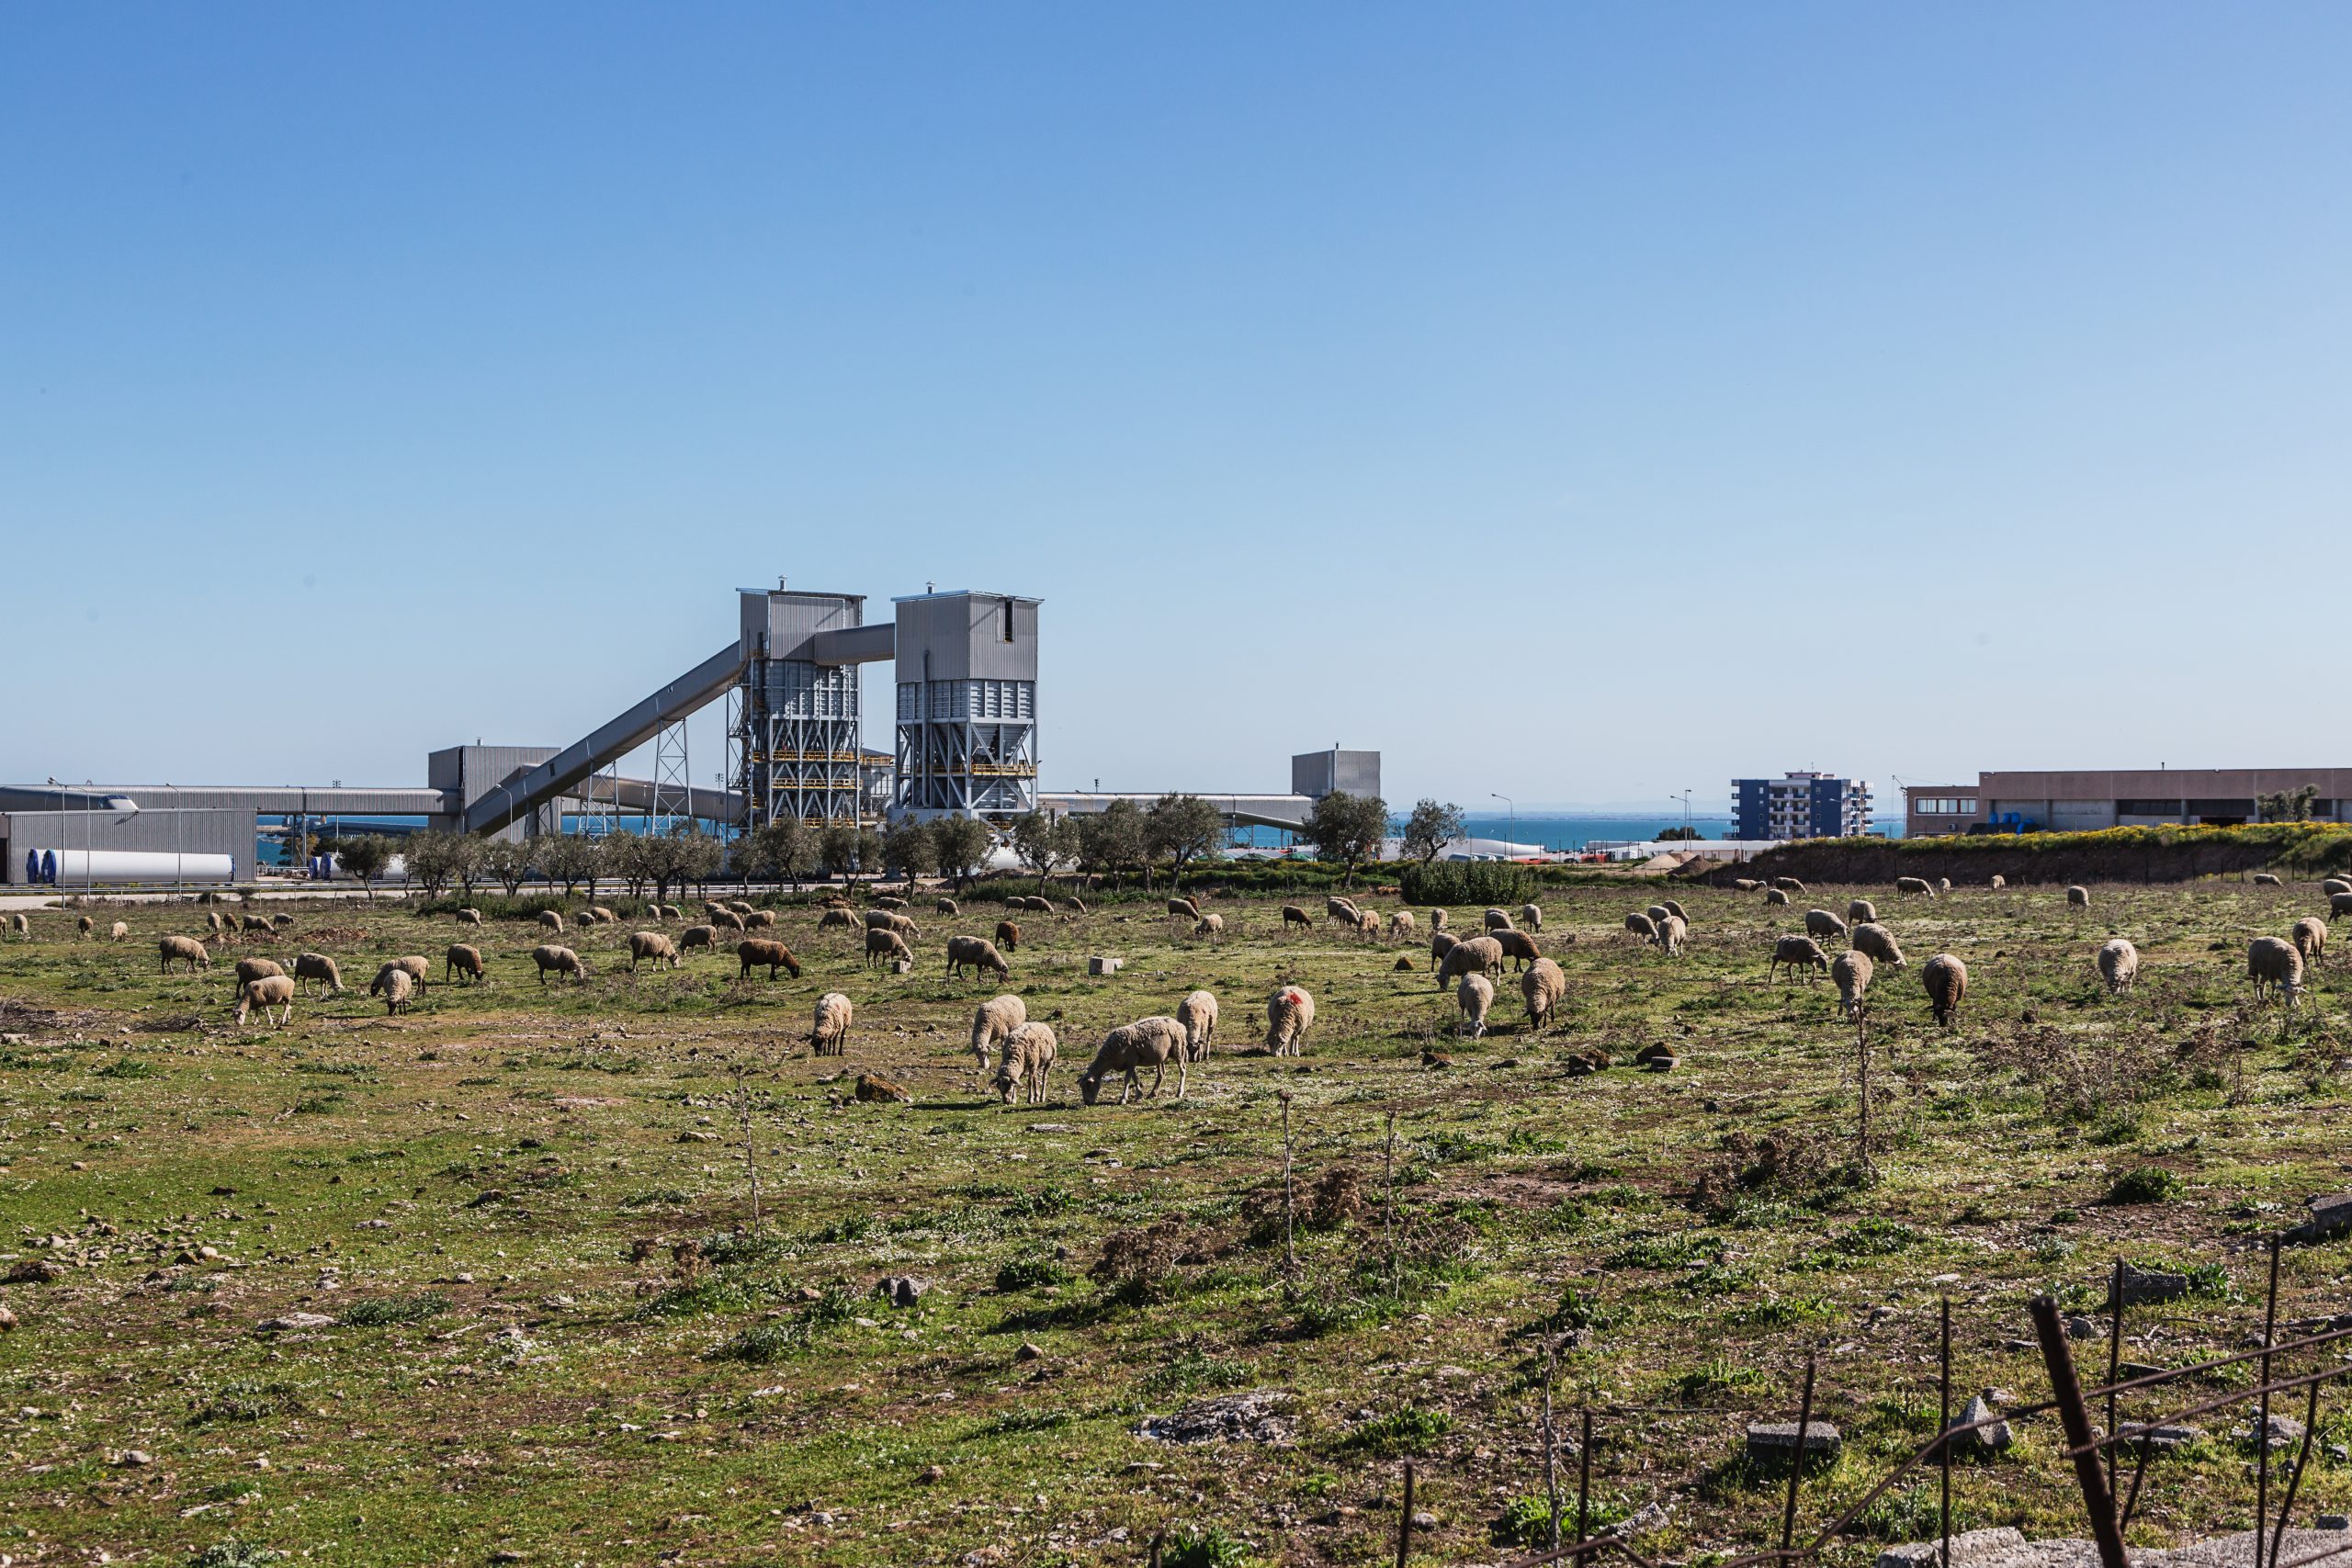 Contrada Pace - Sheep grazing next to the industrial area.